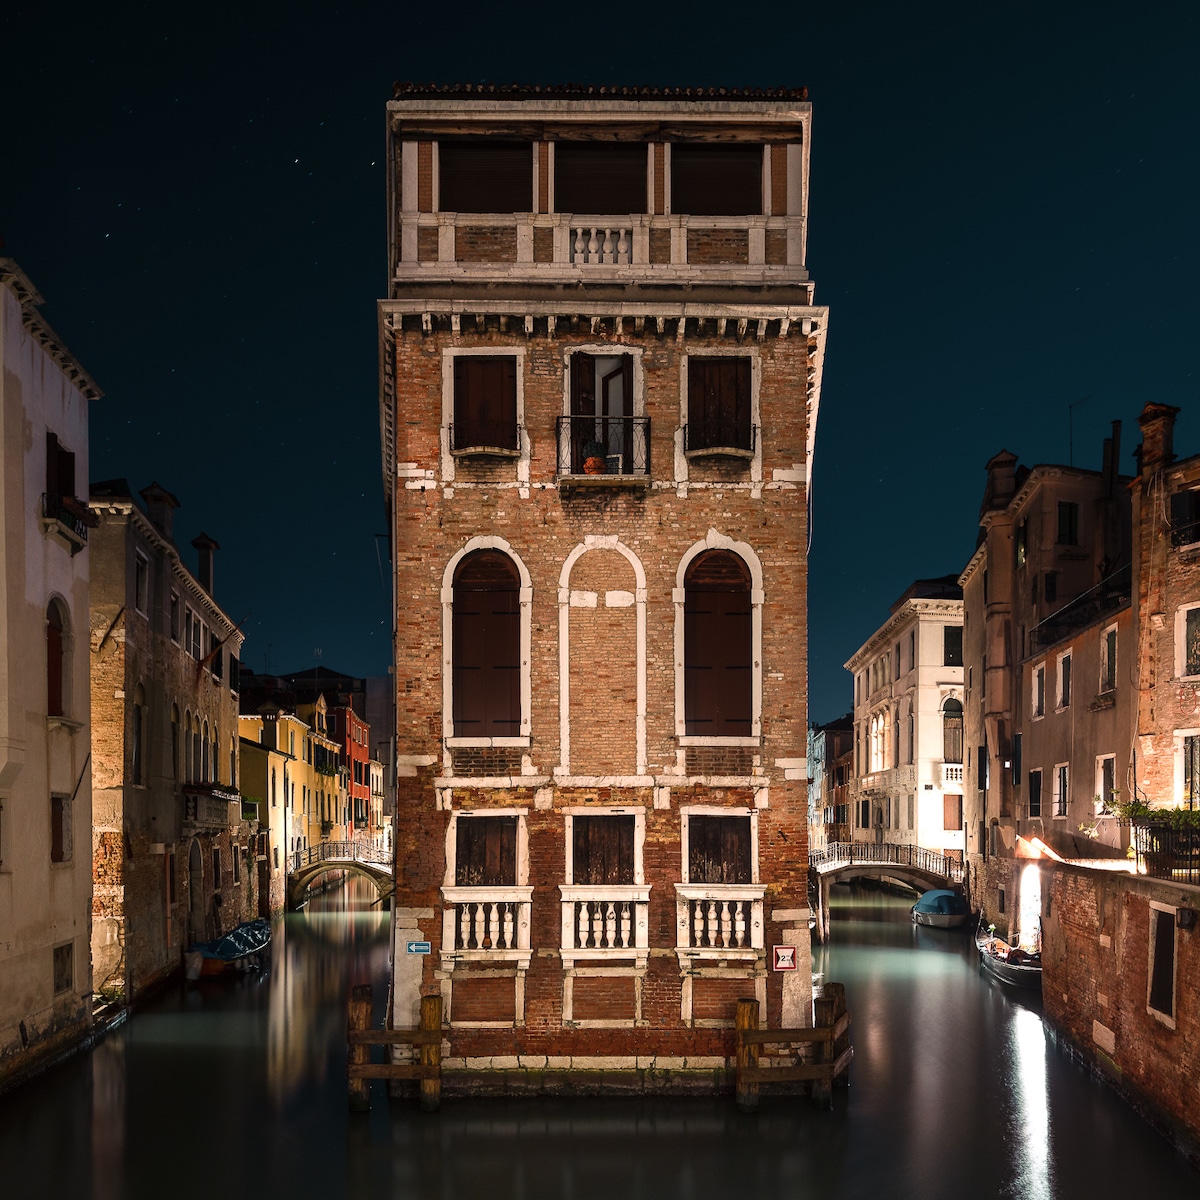 Venice at Night by Thibaud Poirier